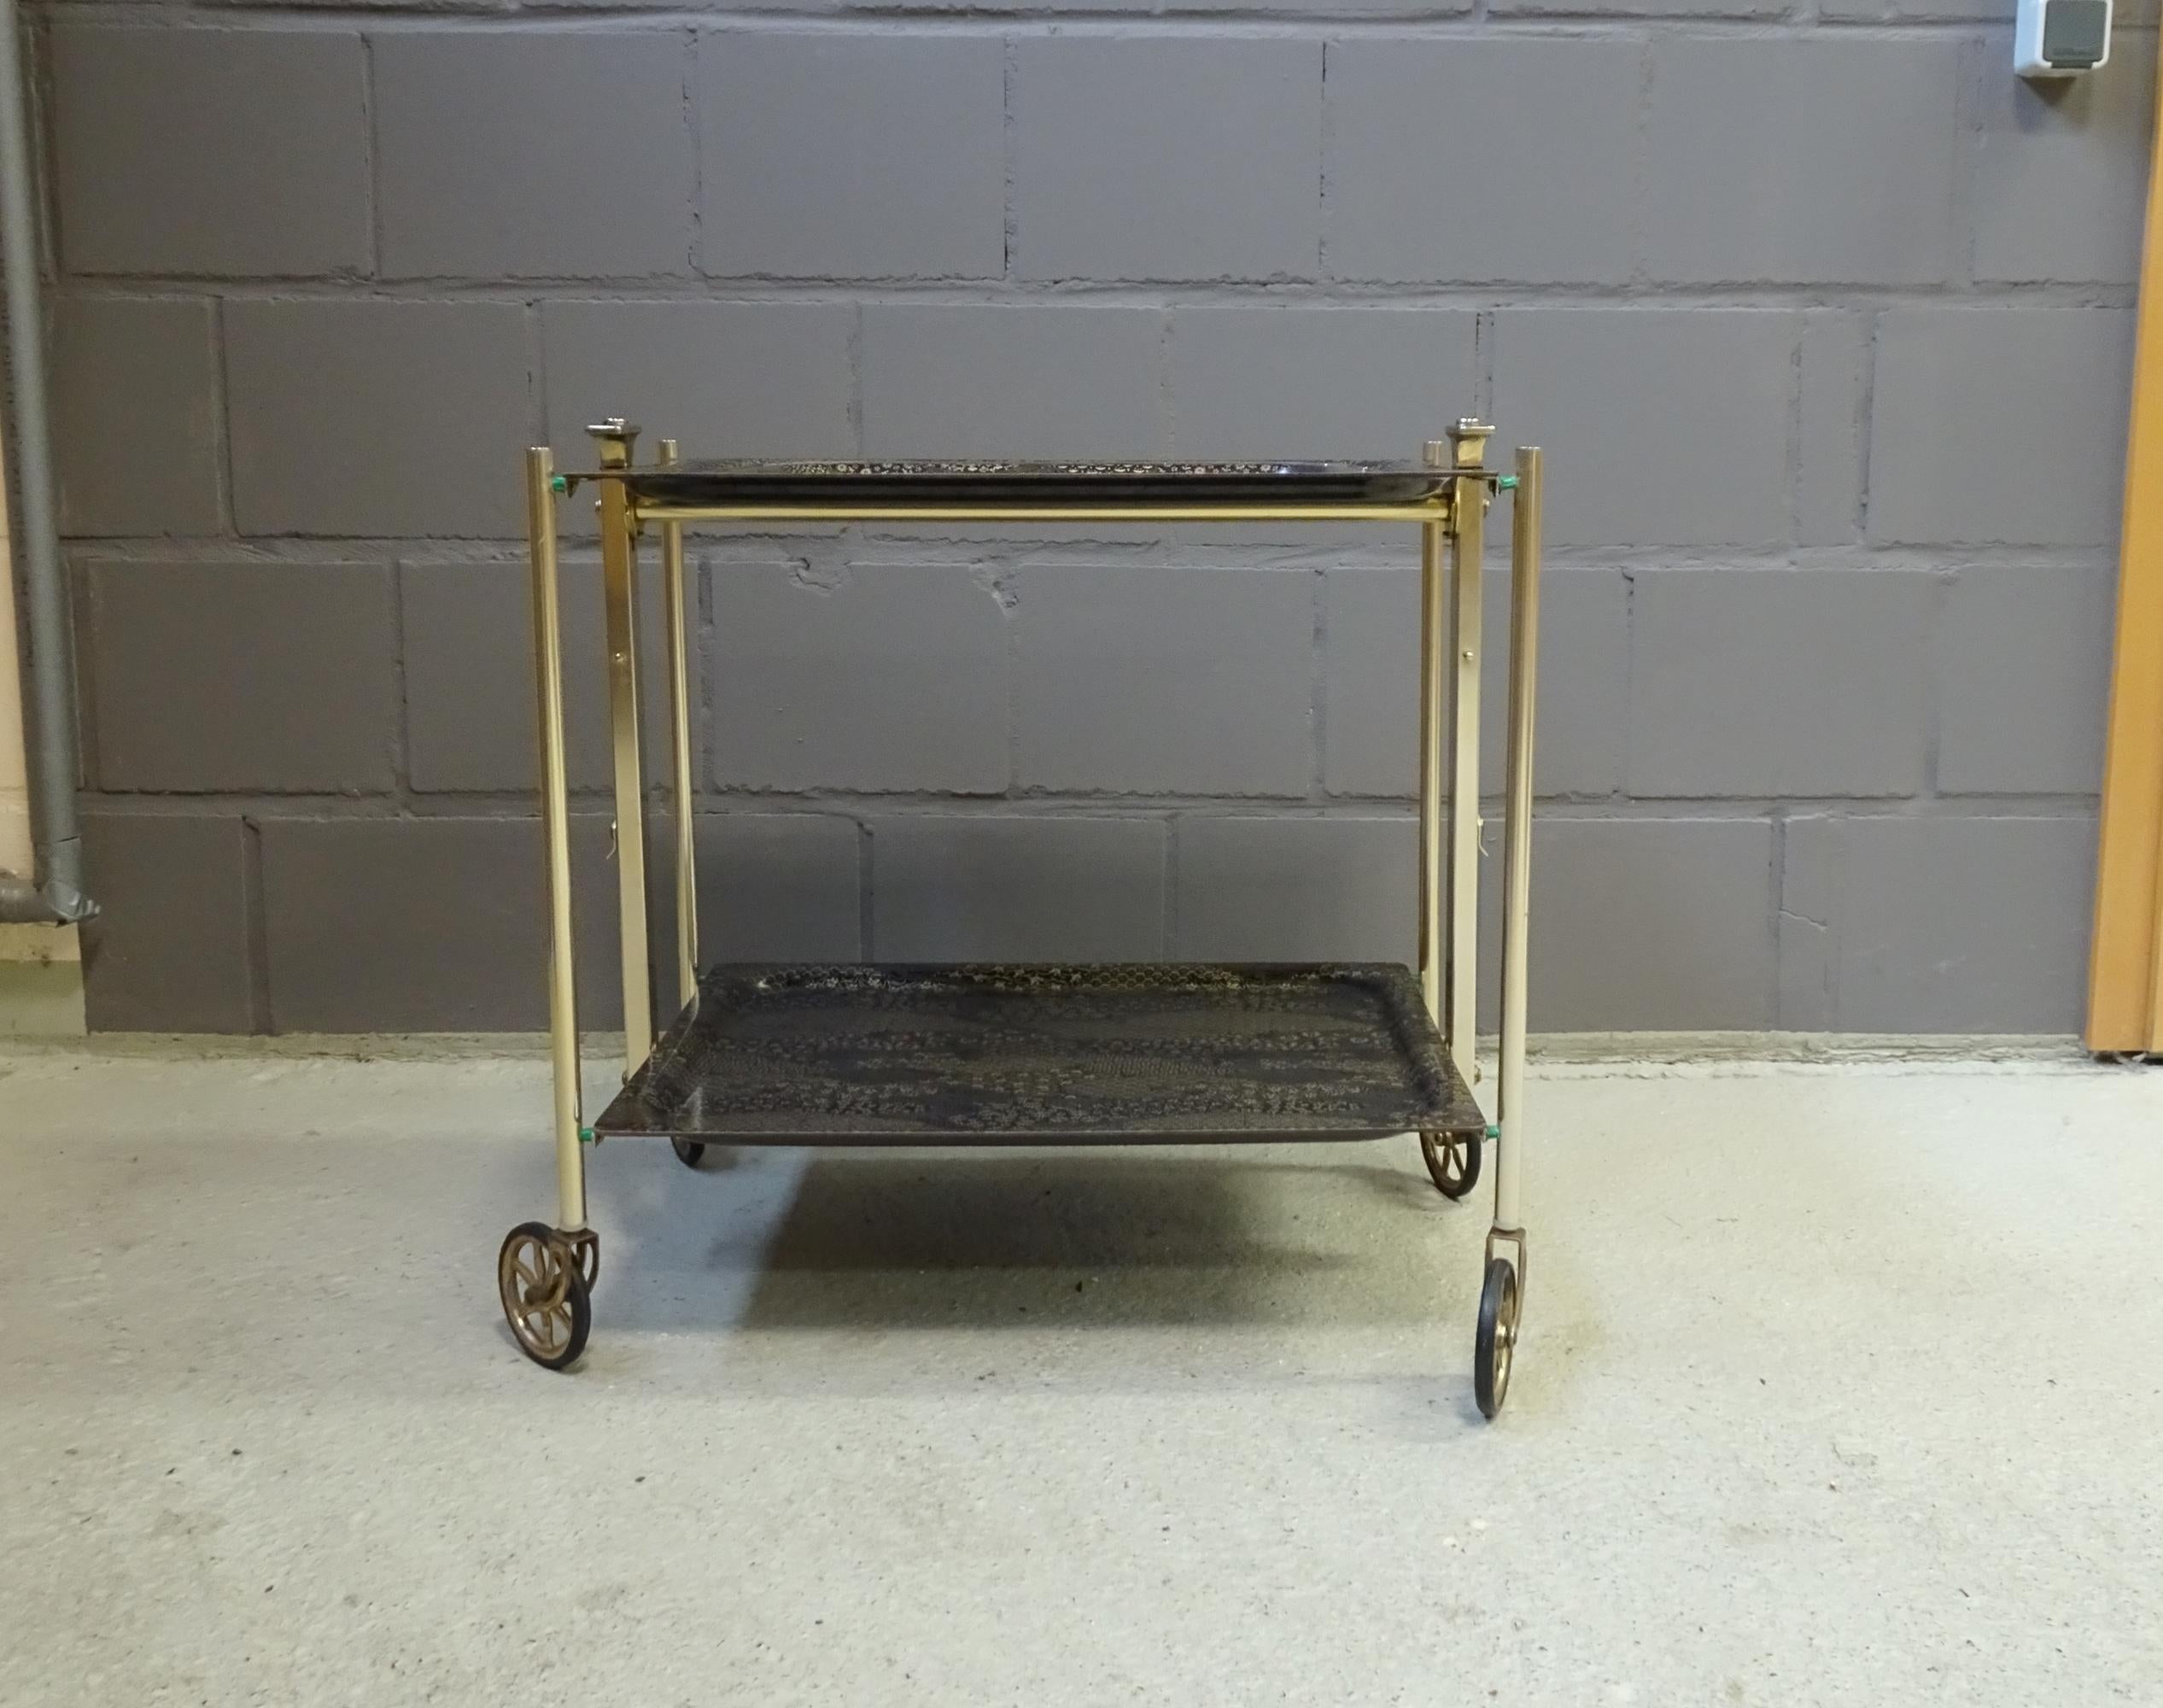 Foldable serving trolley, black and gold dinette, noble bar trolley, trolley, midcentury side table, textable serving table.

Noble Dinett serving trolley from the 1960s-1970s with two shelves on wheels. This version in black and gold-colored